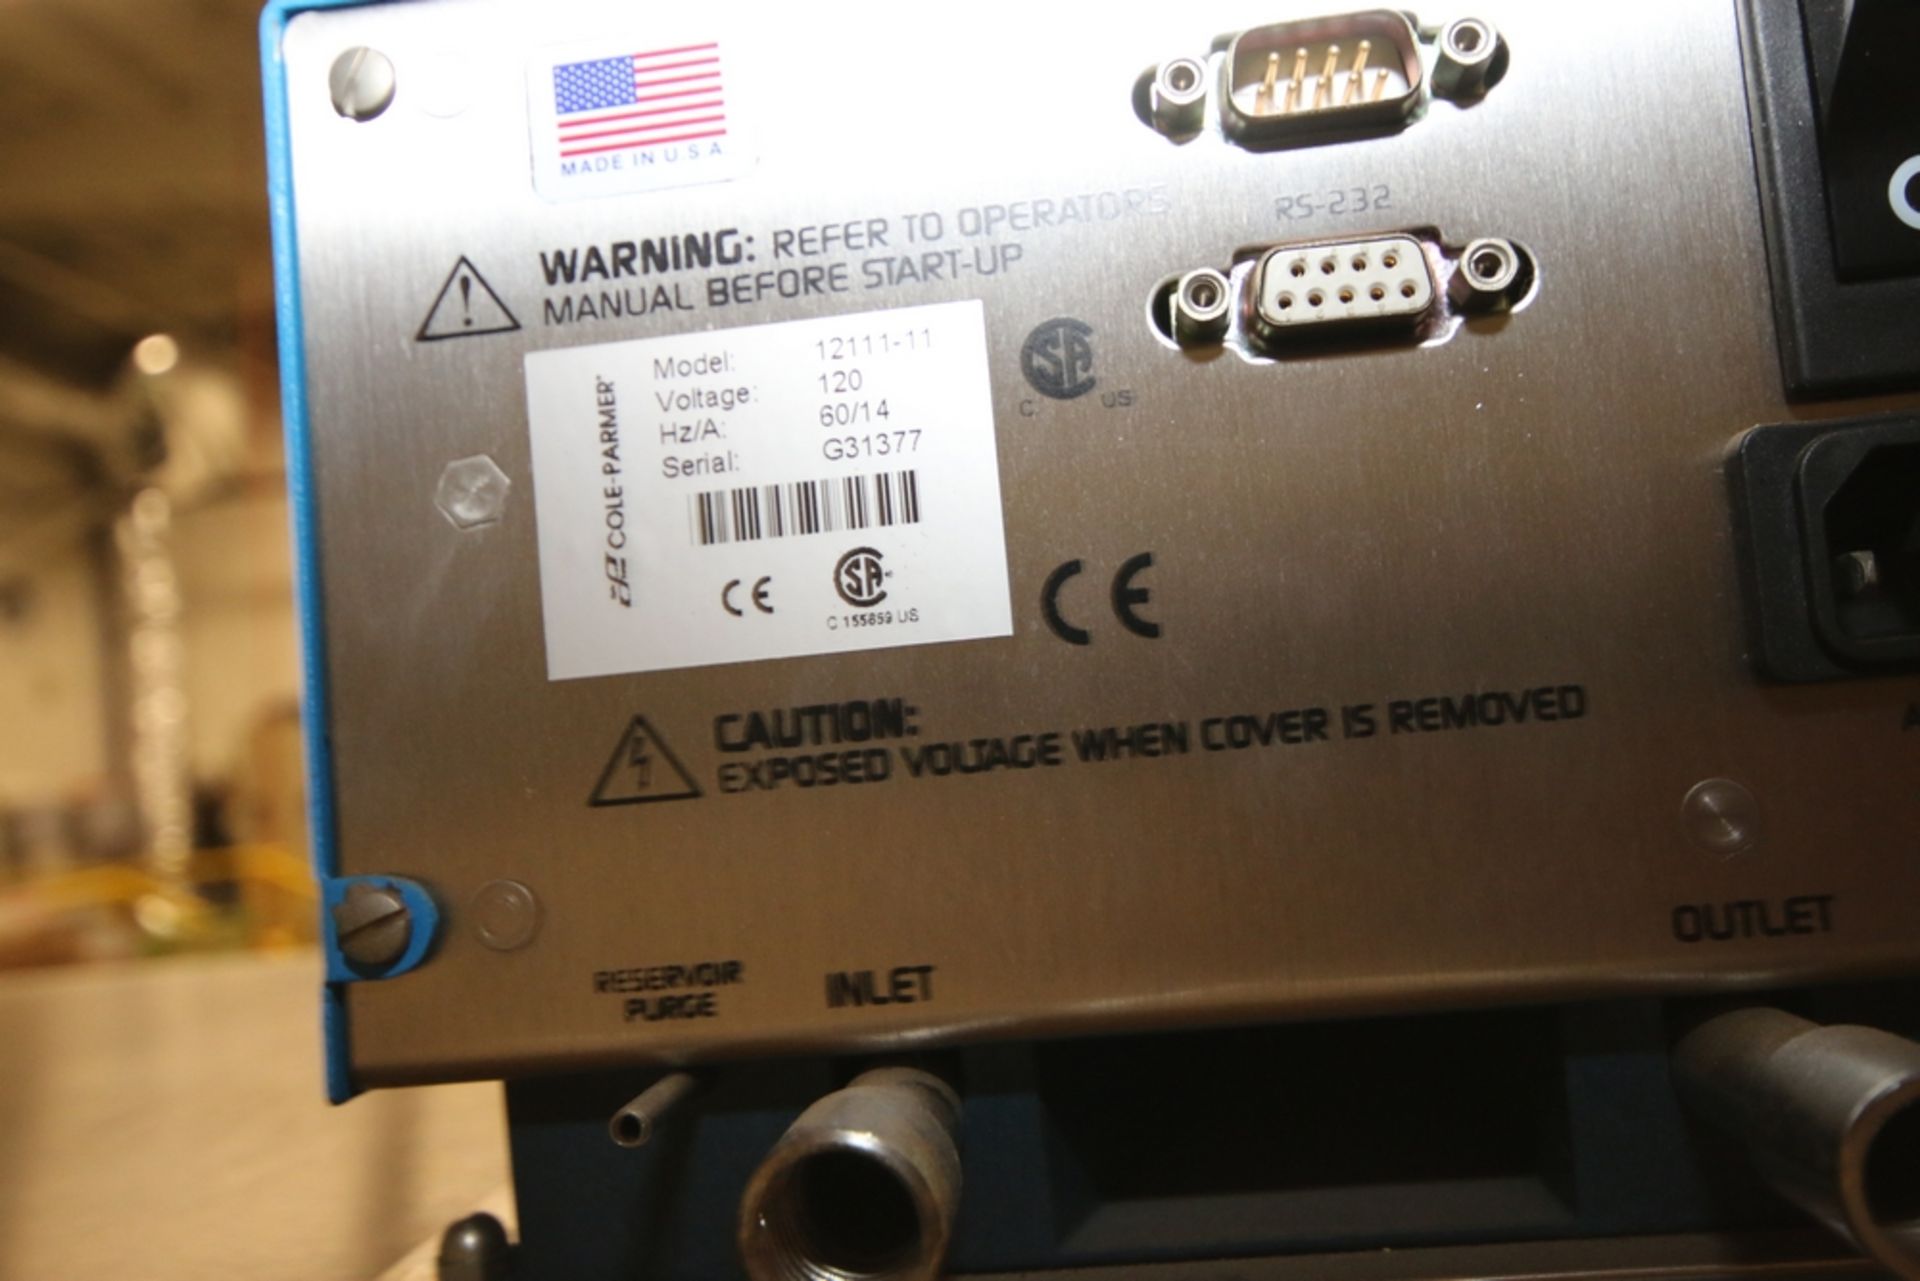 Cole Palmer S/S Water Bath, M/N 12111-11, S/N G31377, 120 Volts ***Located in MDG Auction - Image 3 of 4